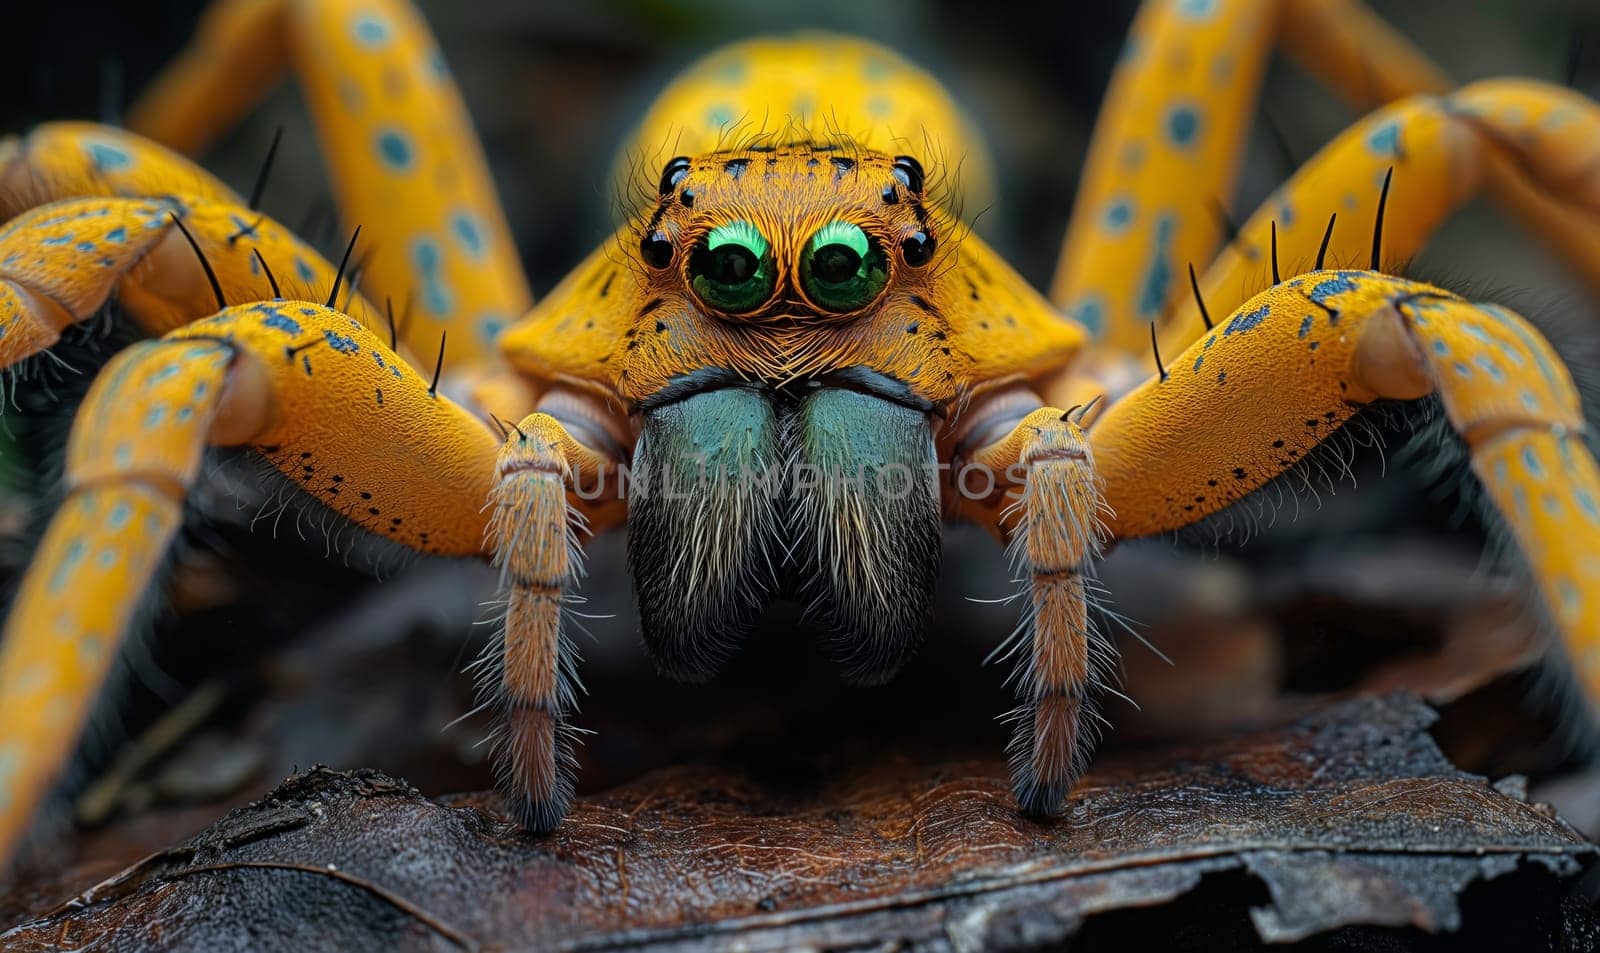 Yellow Spider With Green Eyes Close Up. by Fischeron